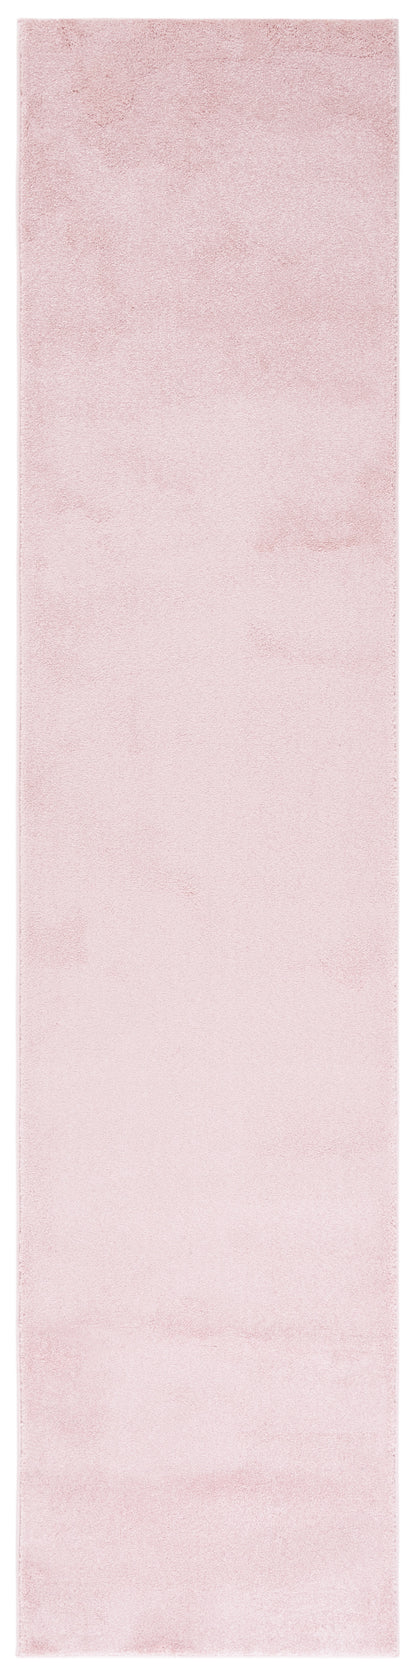 Safavieh Plain And Solid Pns320 Pink Area Rug